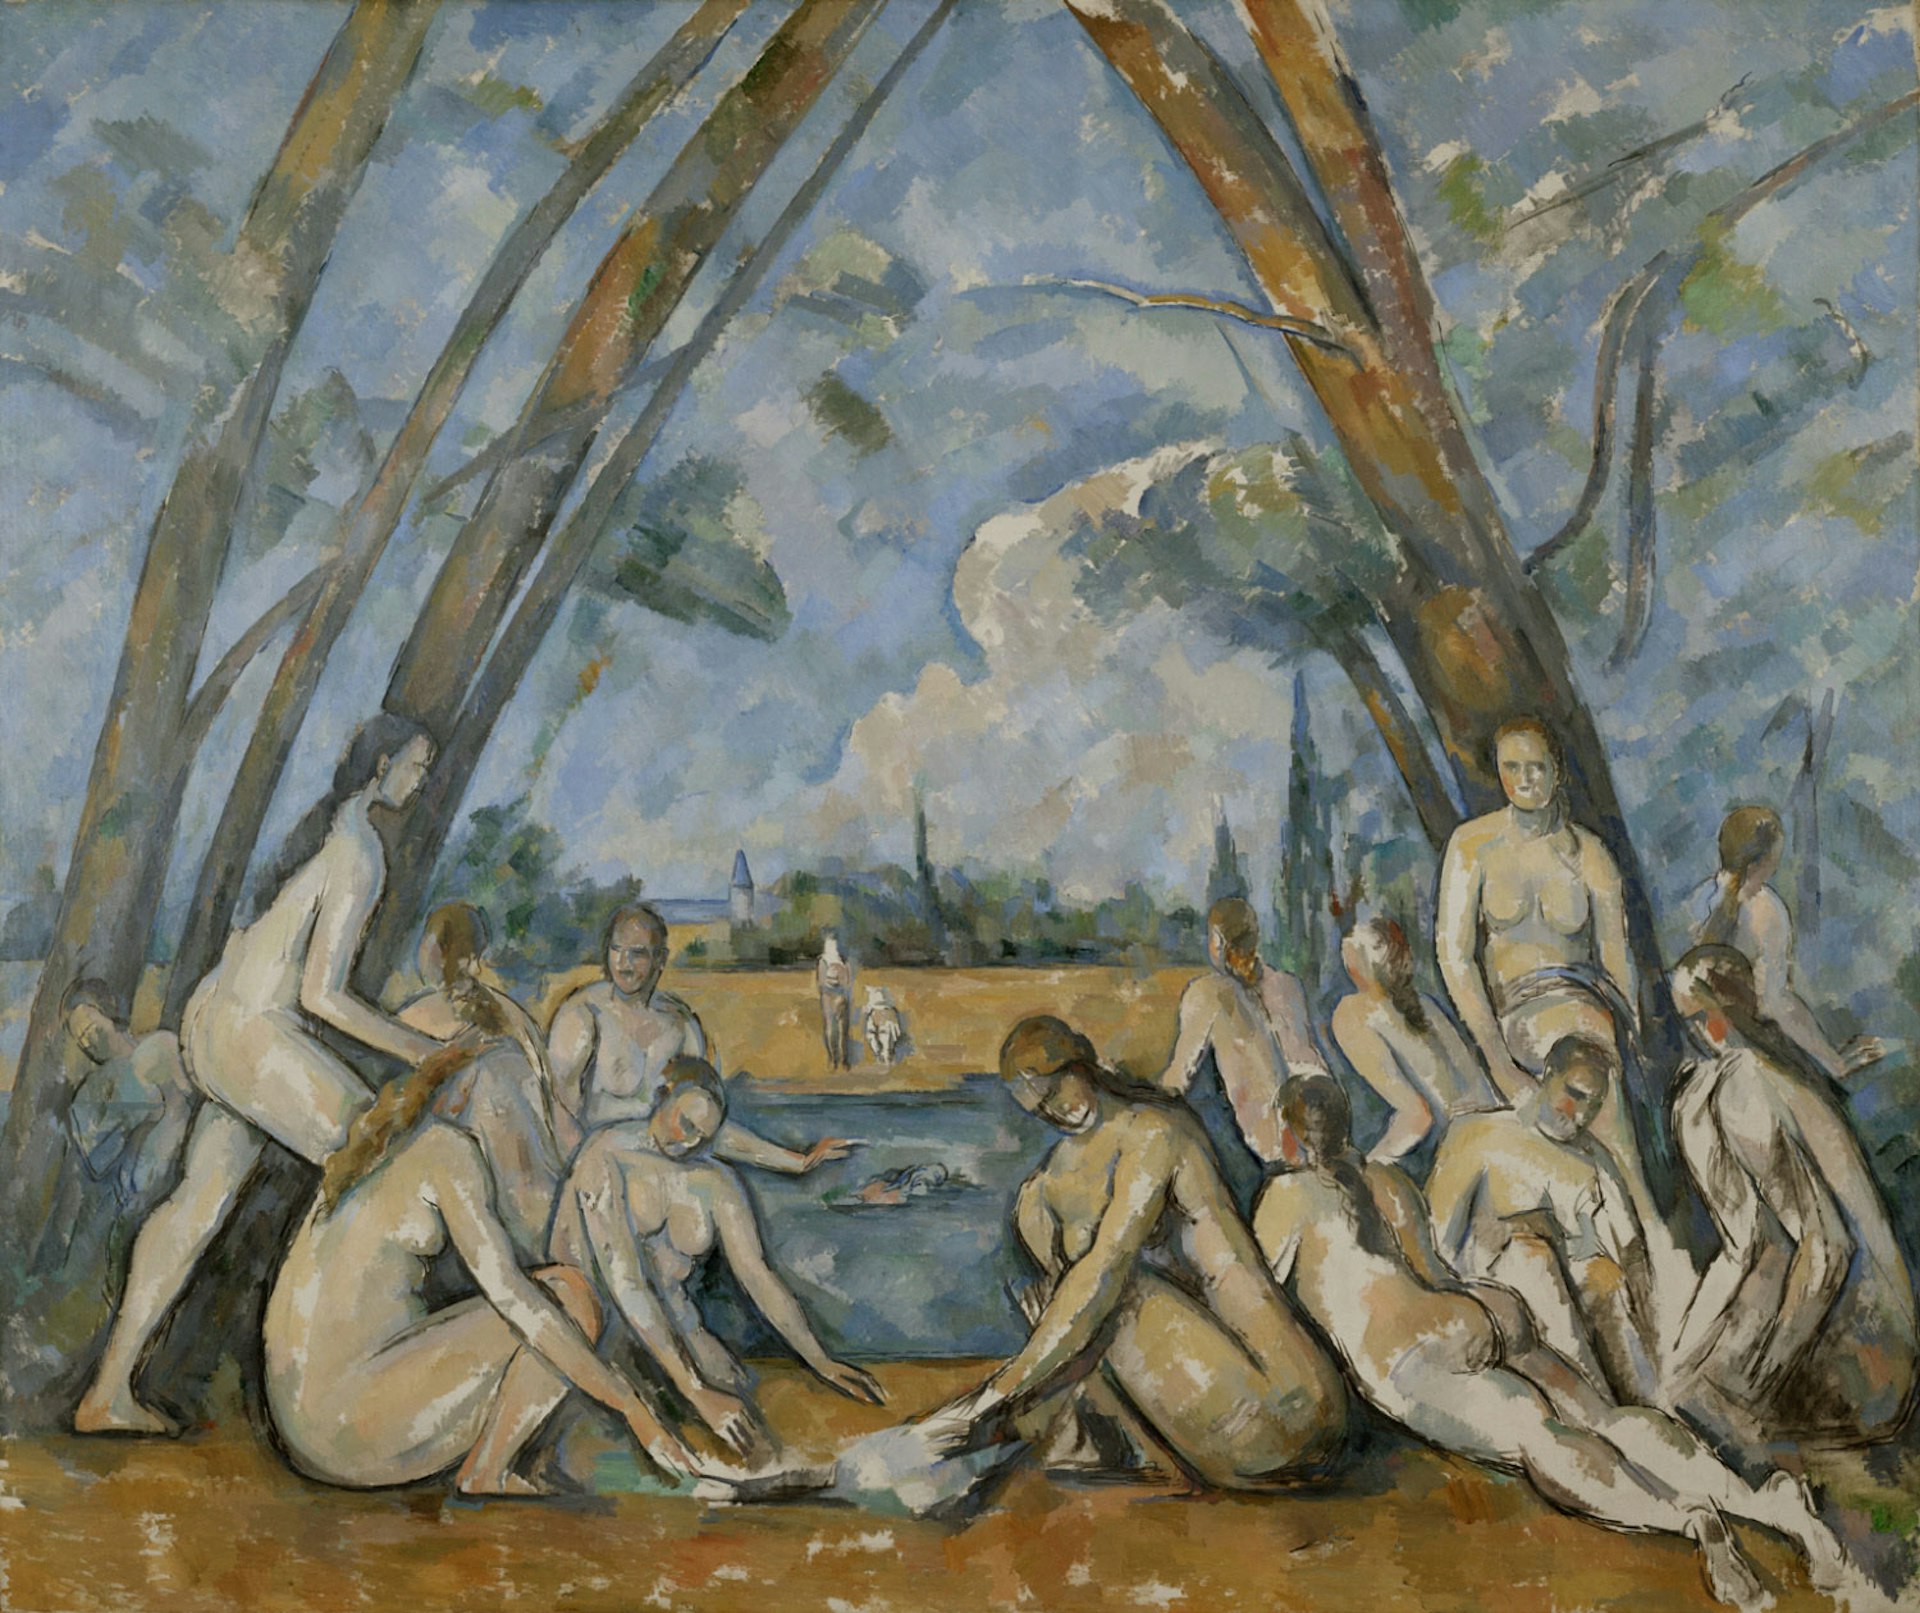 Large Bathers by Paul Cezanne. Image courtesy of the Philadelphia Museum of Art.